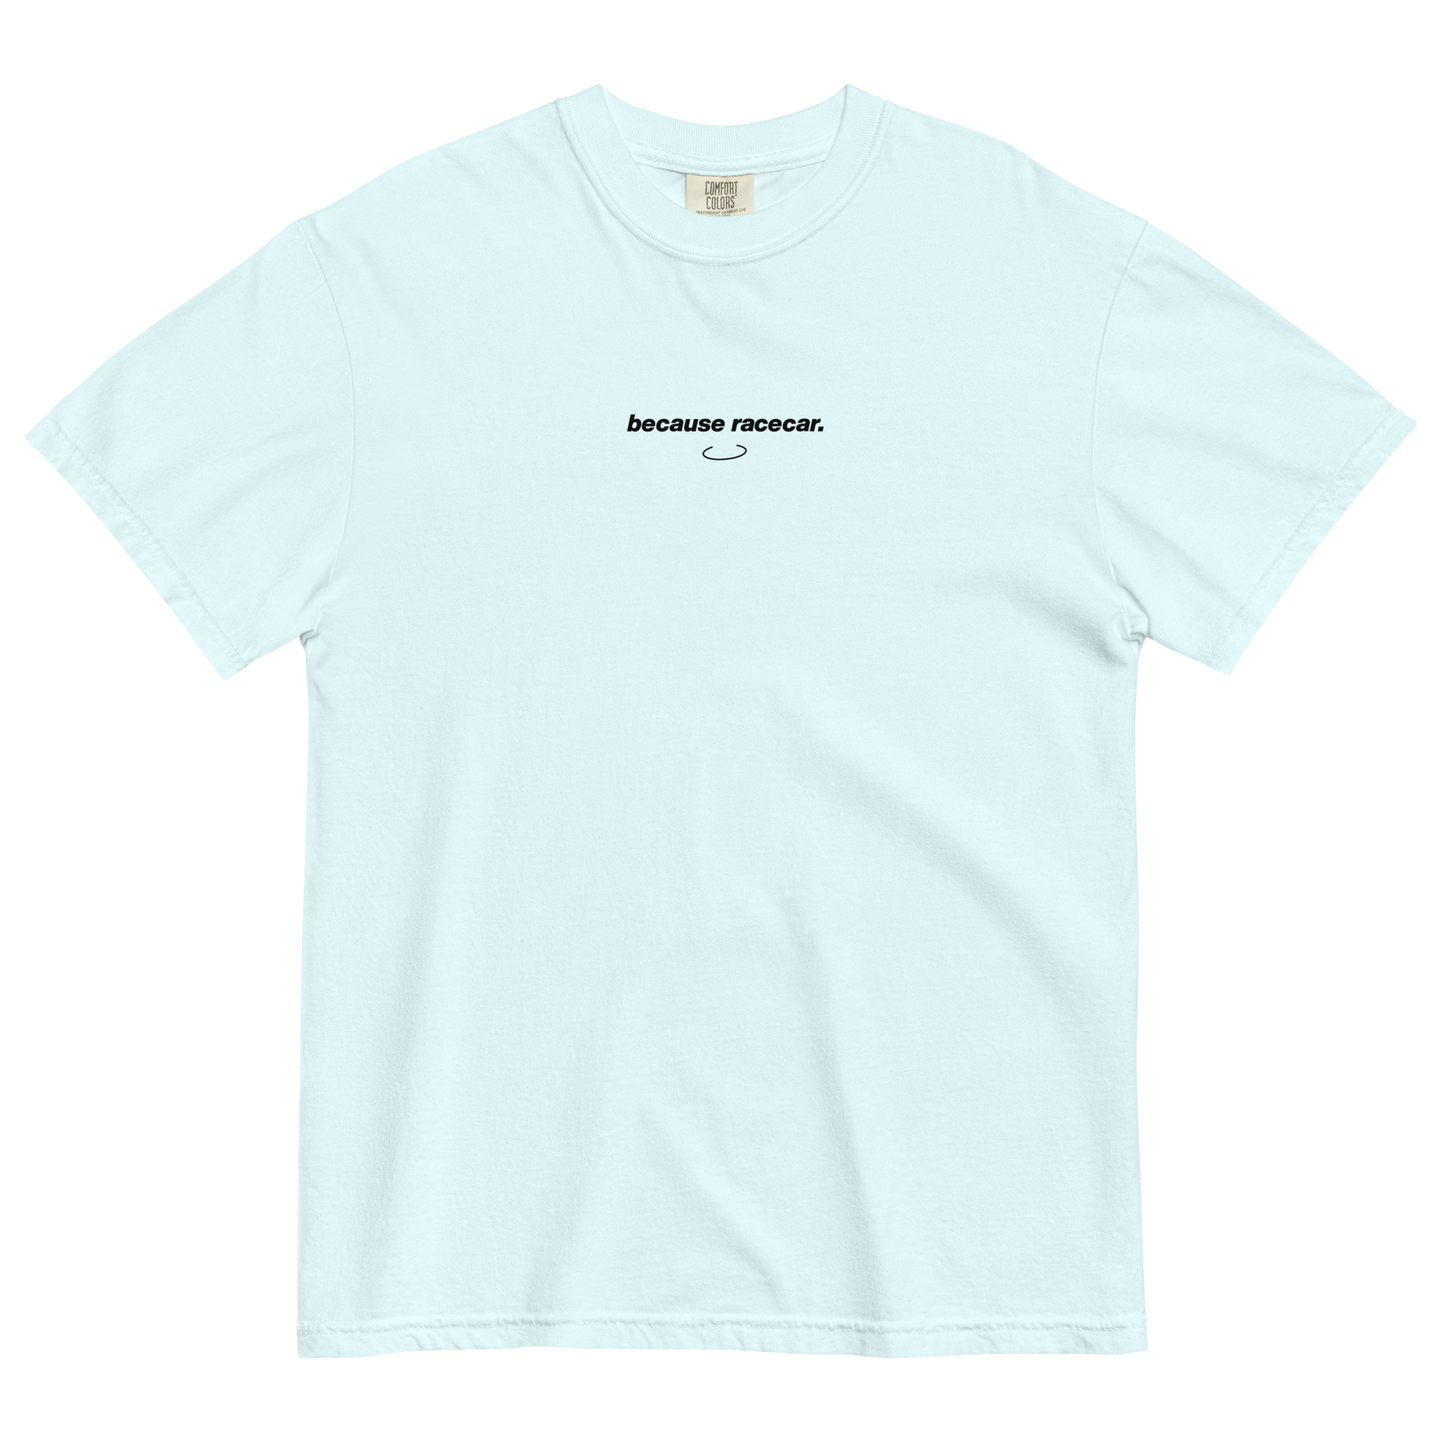 FOUNDER'S COLLECTION "because racecar." Tee